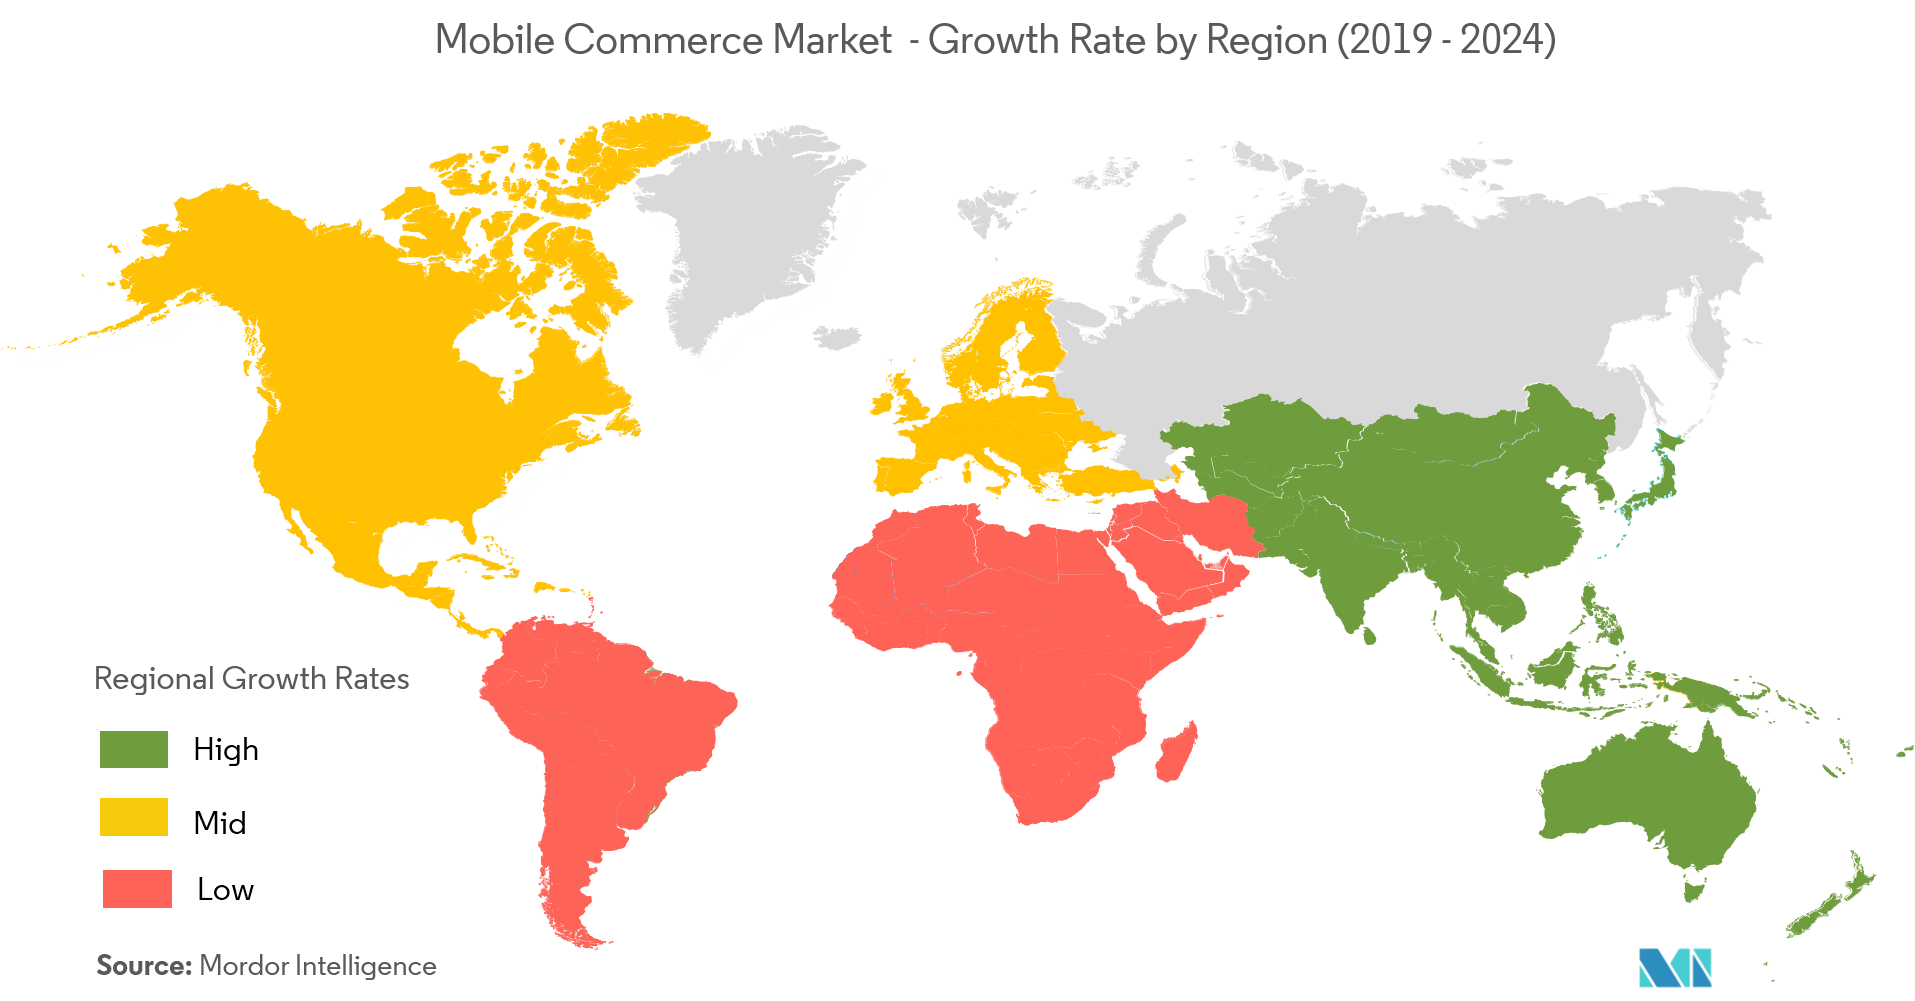 Mobile Commerce Market Growth Rate by Region (2019-2024)